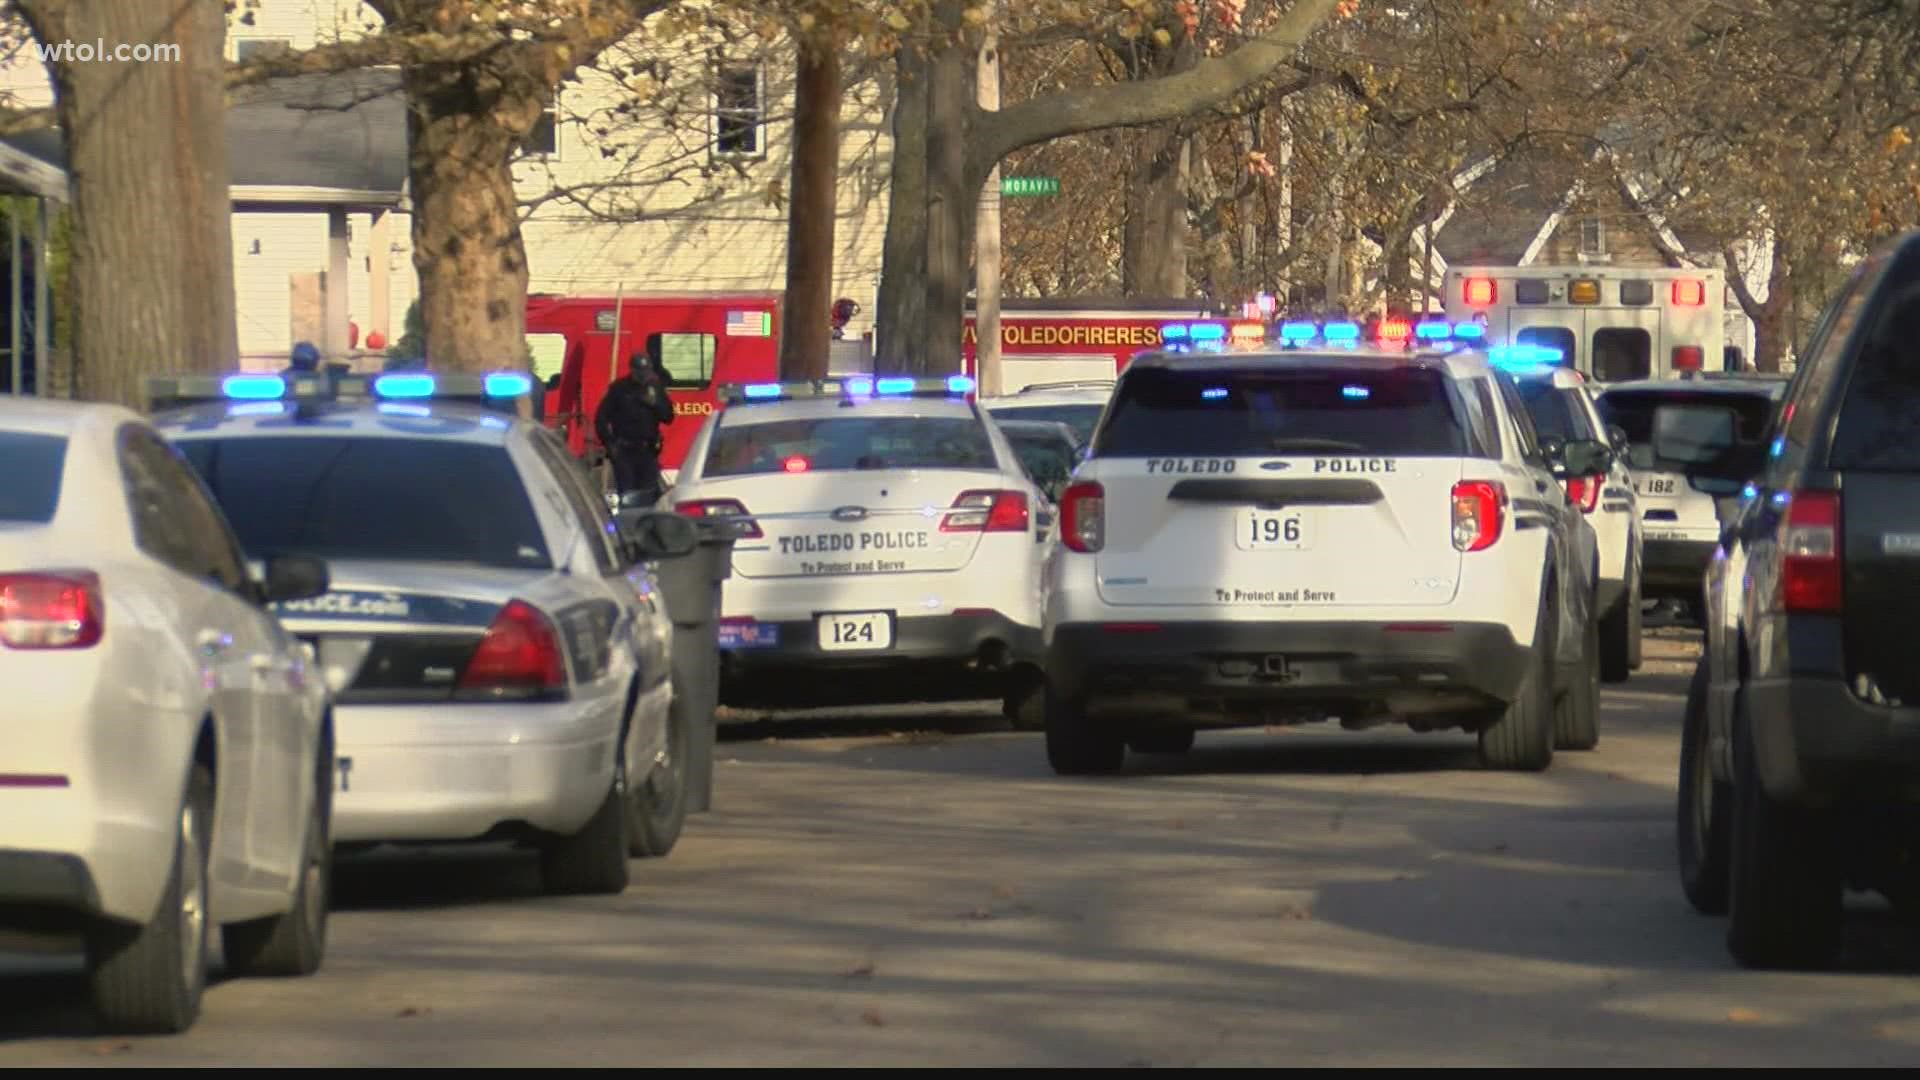 TPD was called out to the scene just after 1 p.m., where 30-year-old Dominique Davis died at the house on Caledonia Street. The shooting left neighbors devastated.